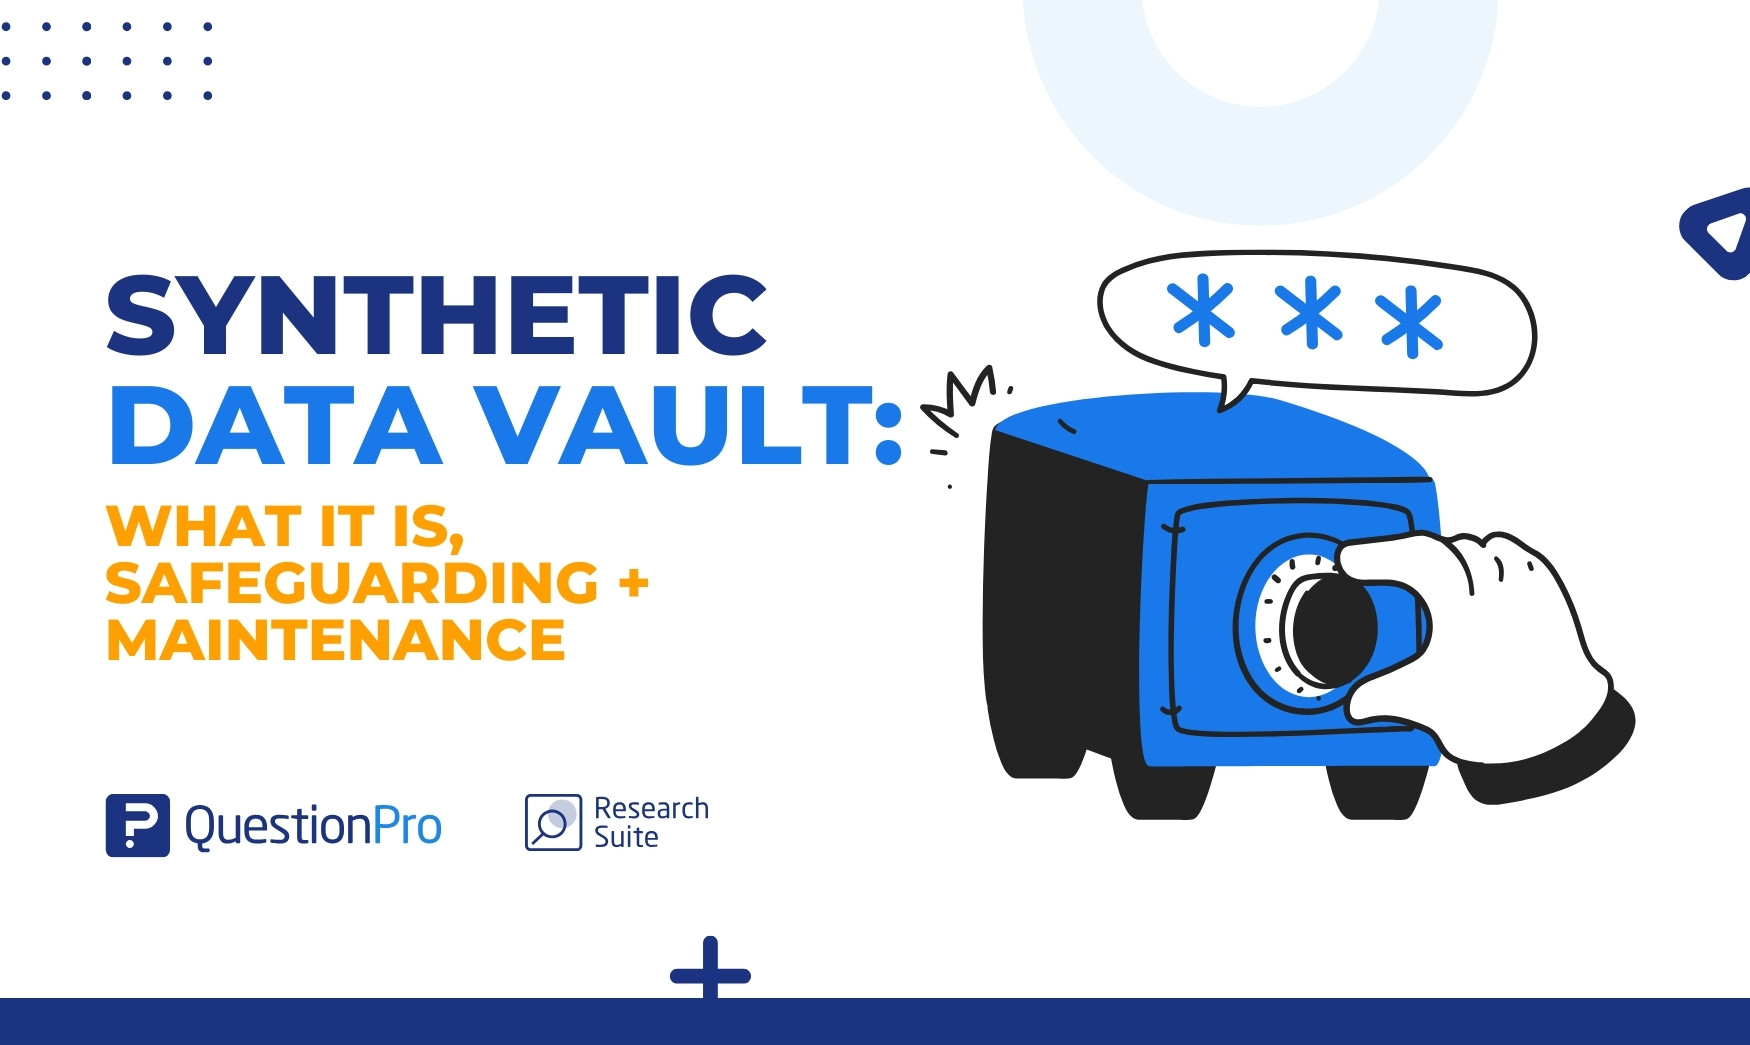 A synthetic data vault is a secure haven for data privacy. Learn how it works, safeguards sensitive information, and ensures data management.